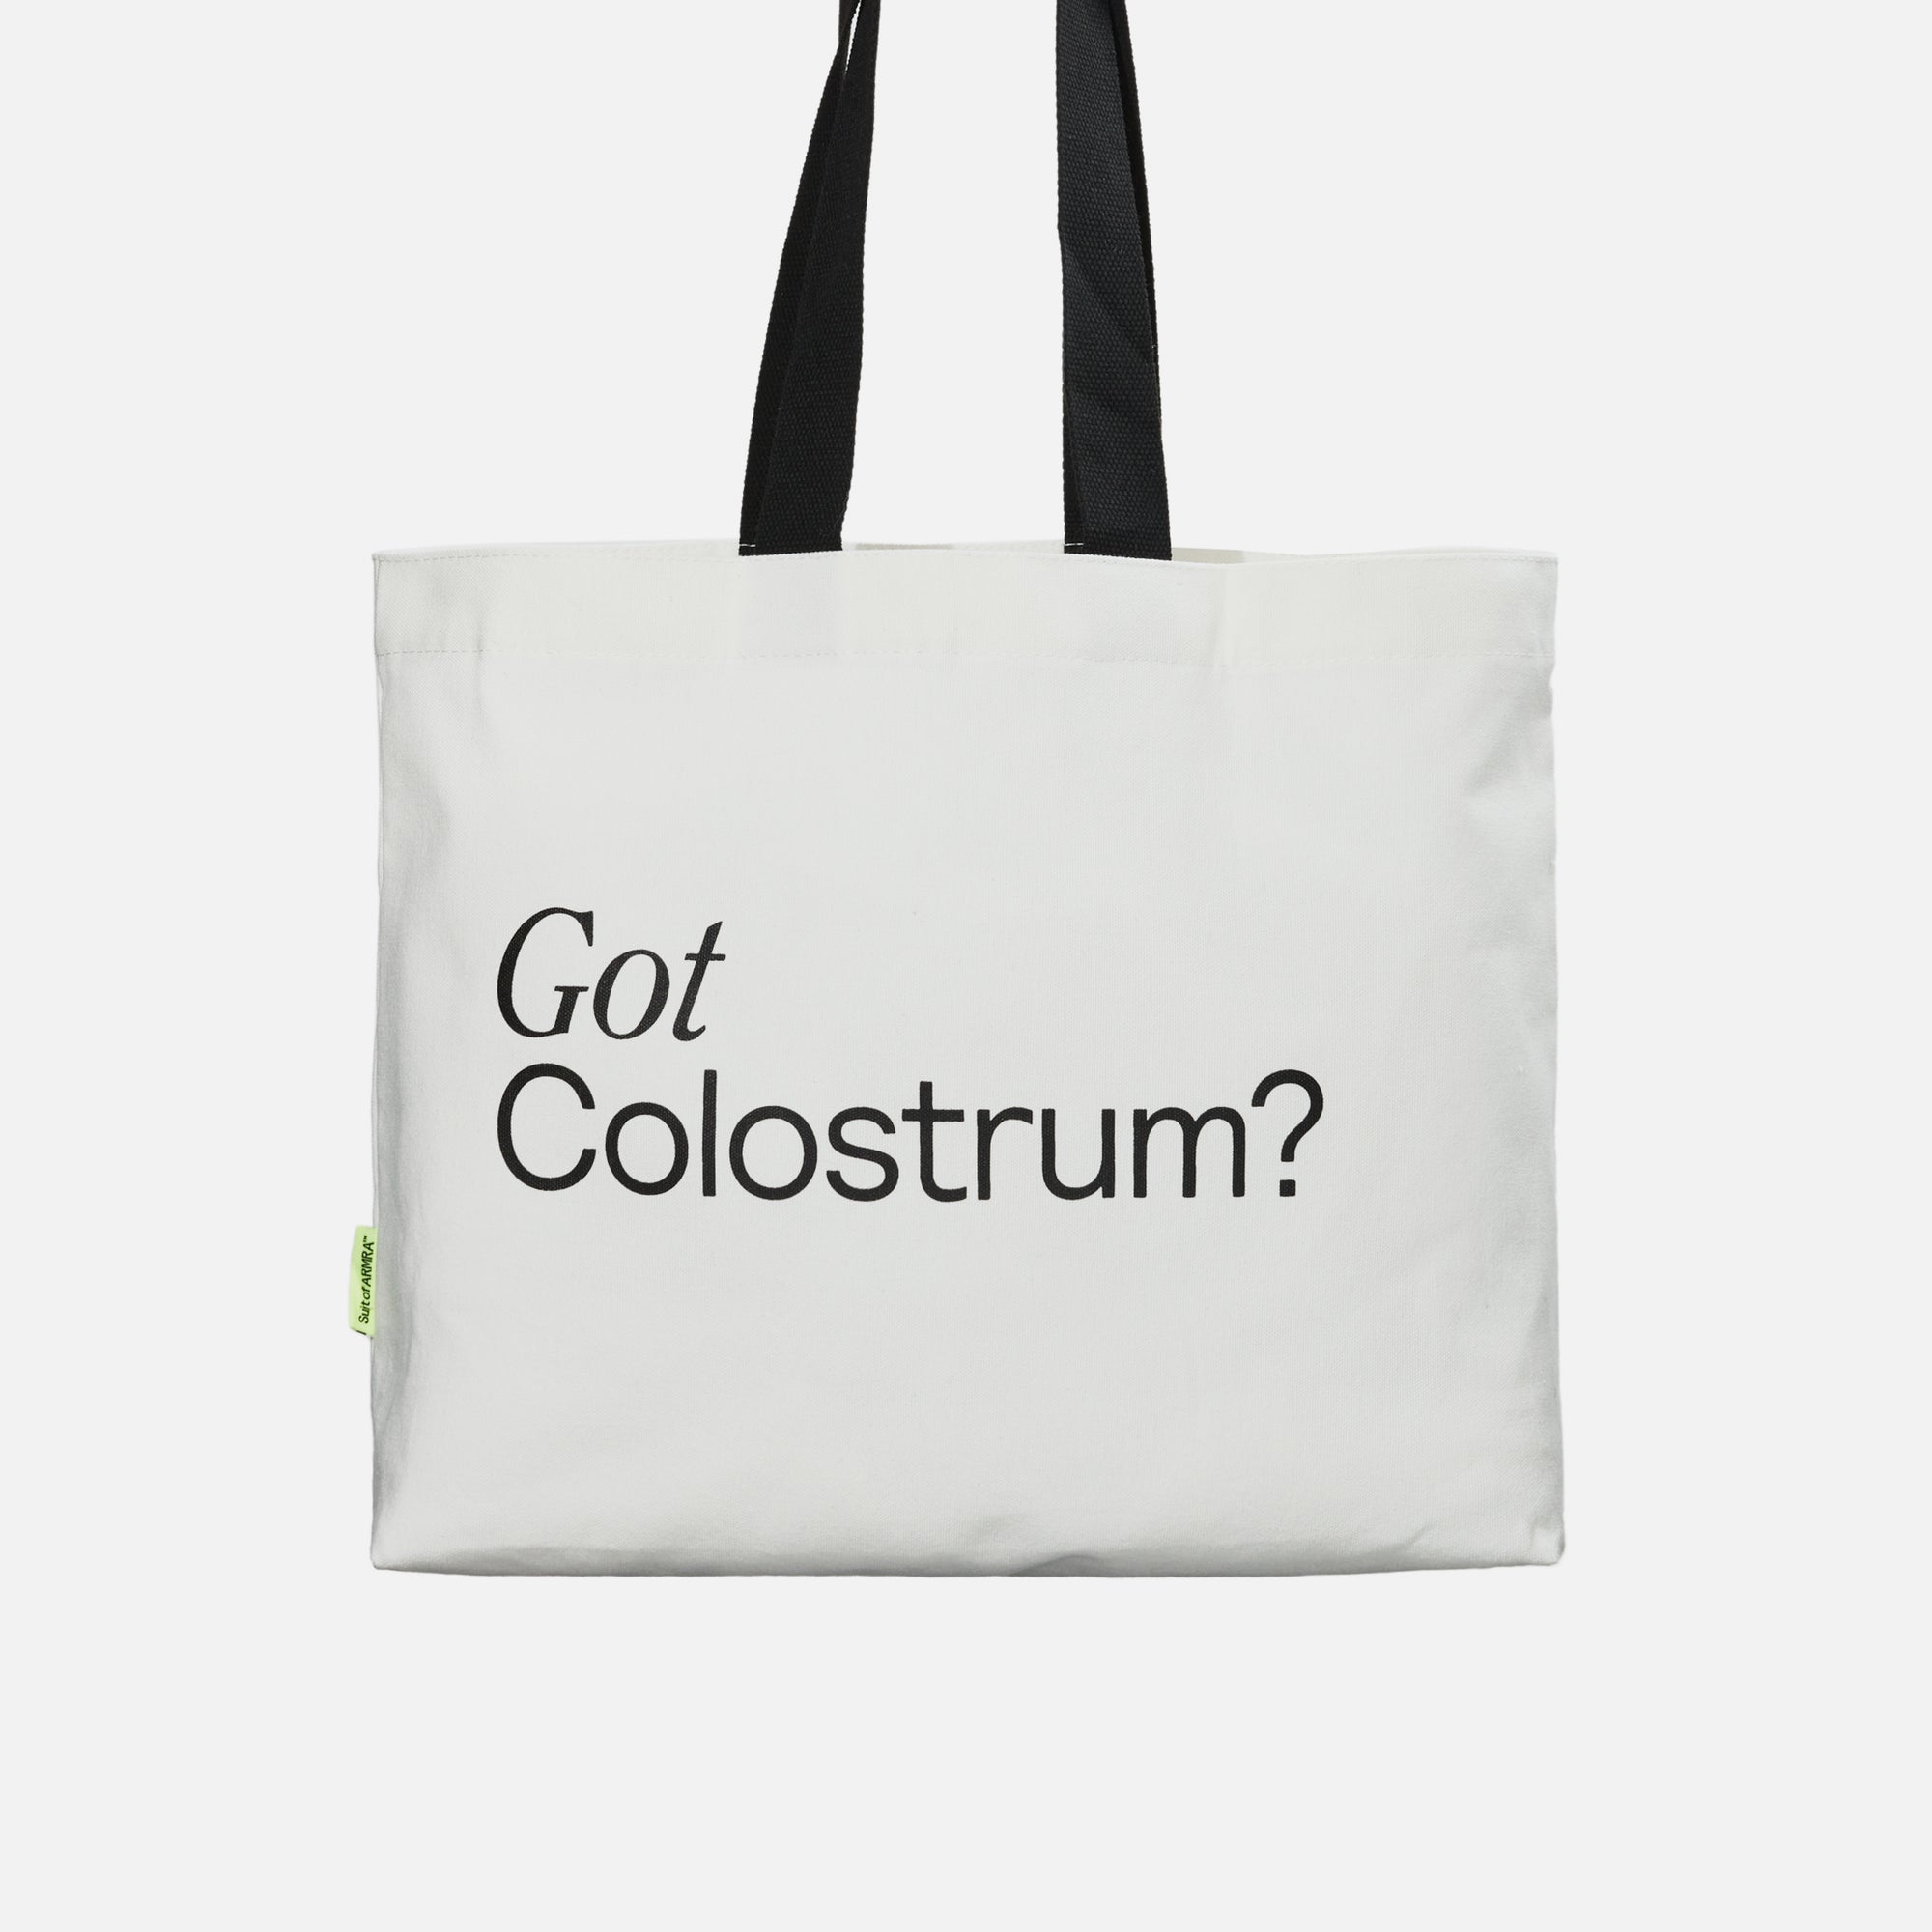 Back of white tote bag with black handles hanging with black text “Got Colostrum”